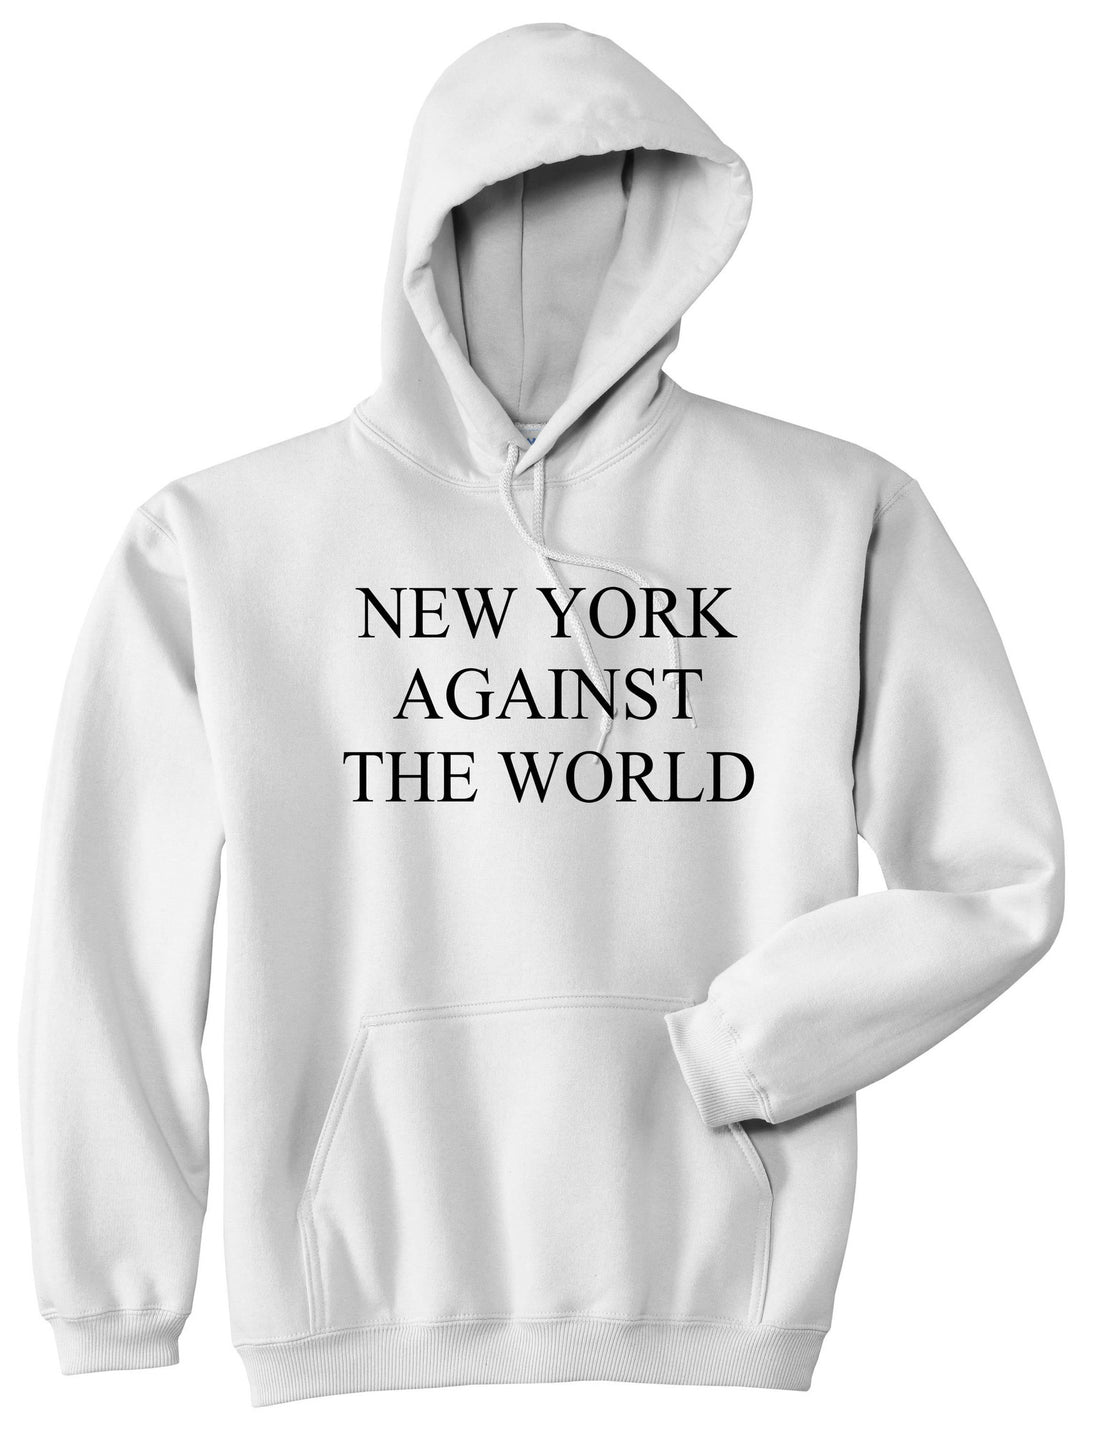 New York Against The World Pullover Hoodie Hoody in White by Kings Of NY